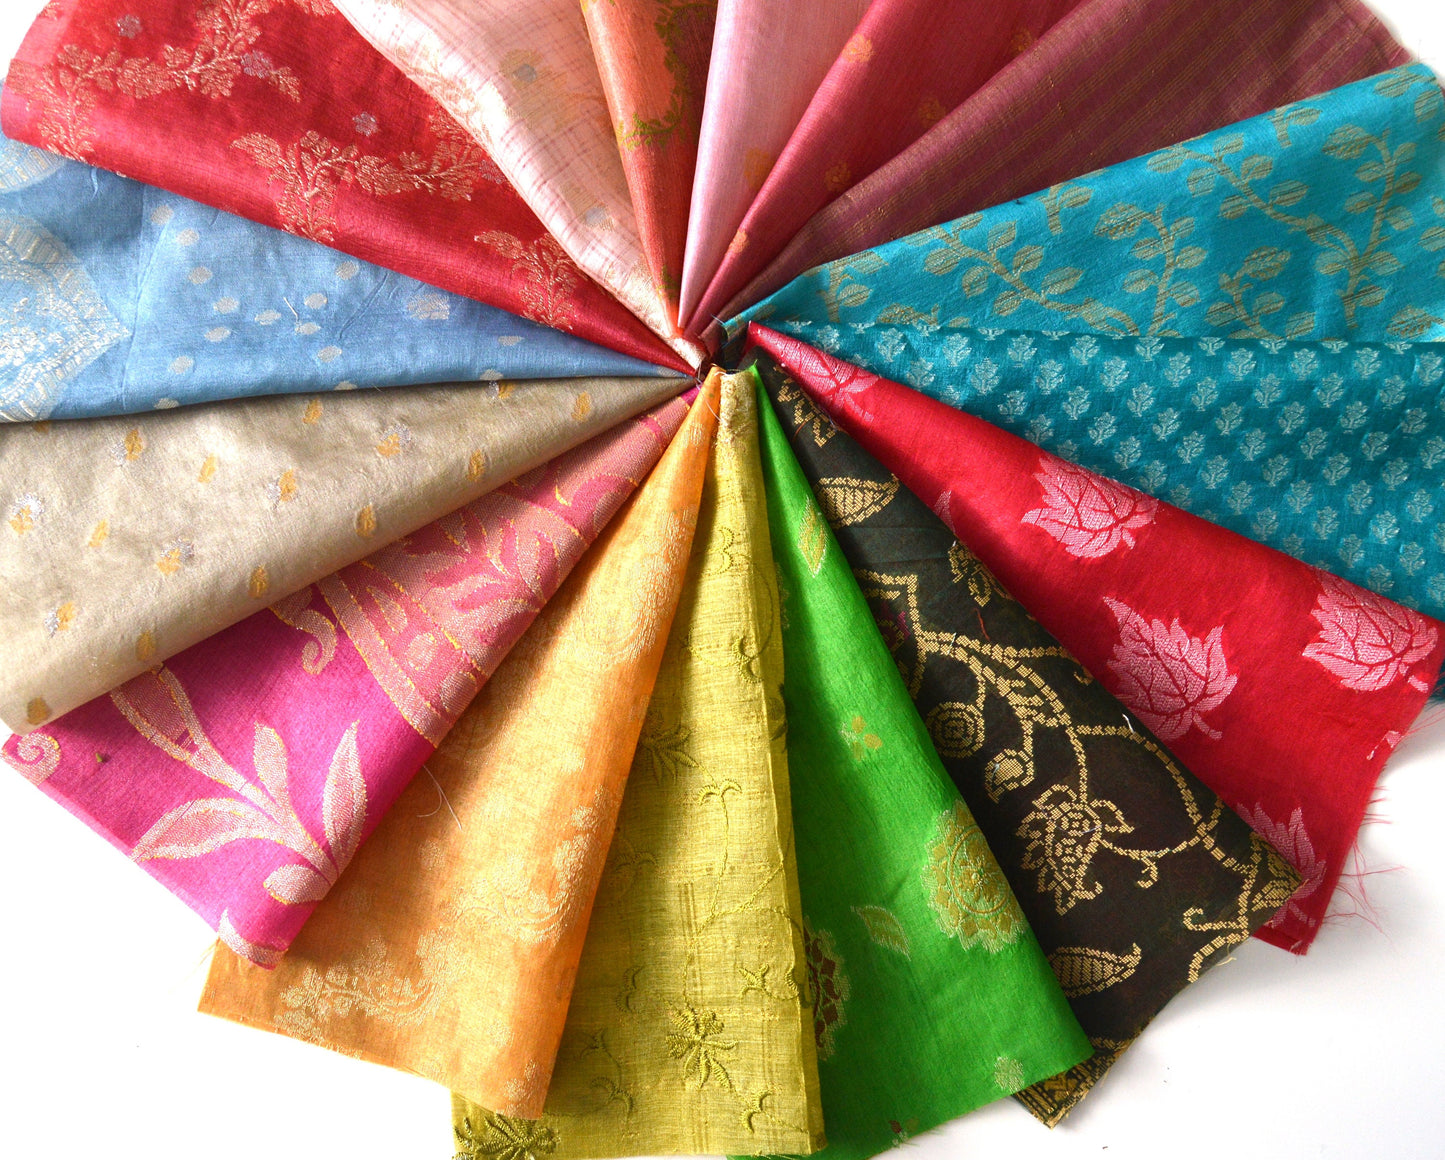 5 Inch x 16 Pieces Mixed Recycled Vintage Sari Squares Brocade Craft Fabric Card Making Collage Mixed Media Textile Art Sewing Junk Journal